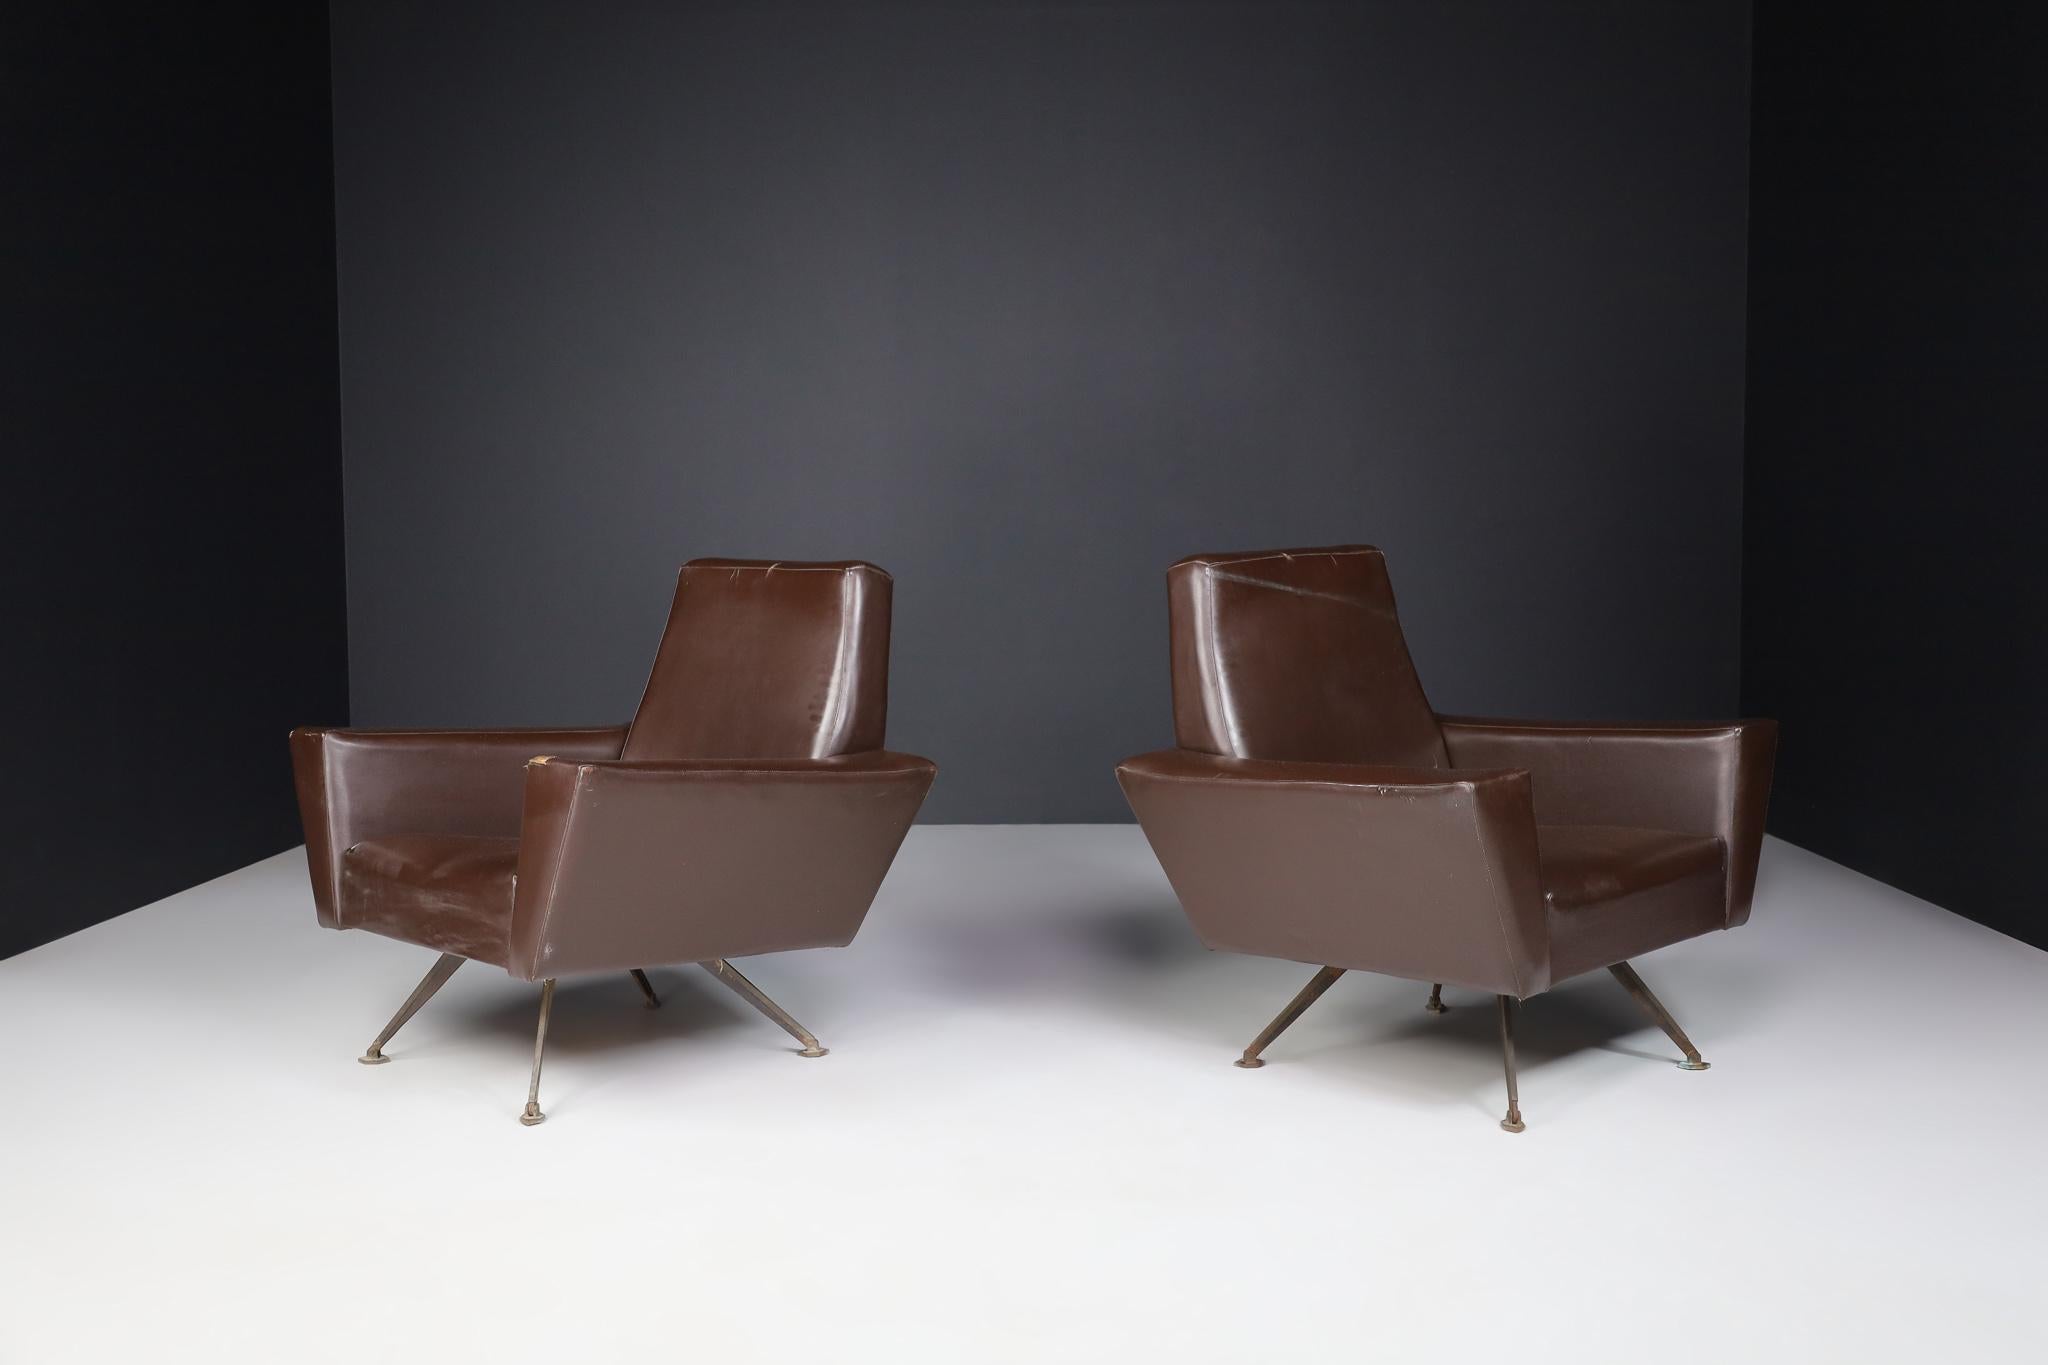 Pair of armchairs by Studio Tecnico Italy A.P.A. and designed by Lenzi 1950s.

This fantastic pair of armchairs are made in Italy and features a well-proportioned construction of sharp angles and straight lines. Manufactured in Pistoia-Quarrata by